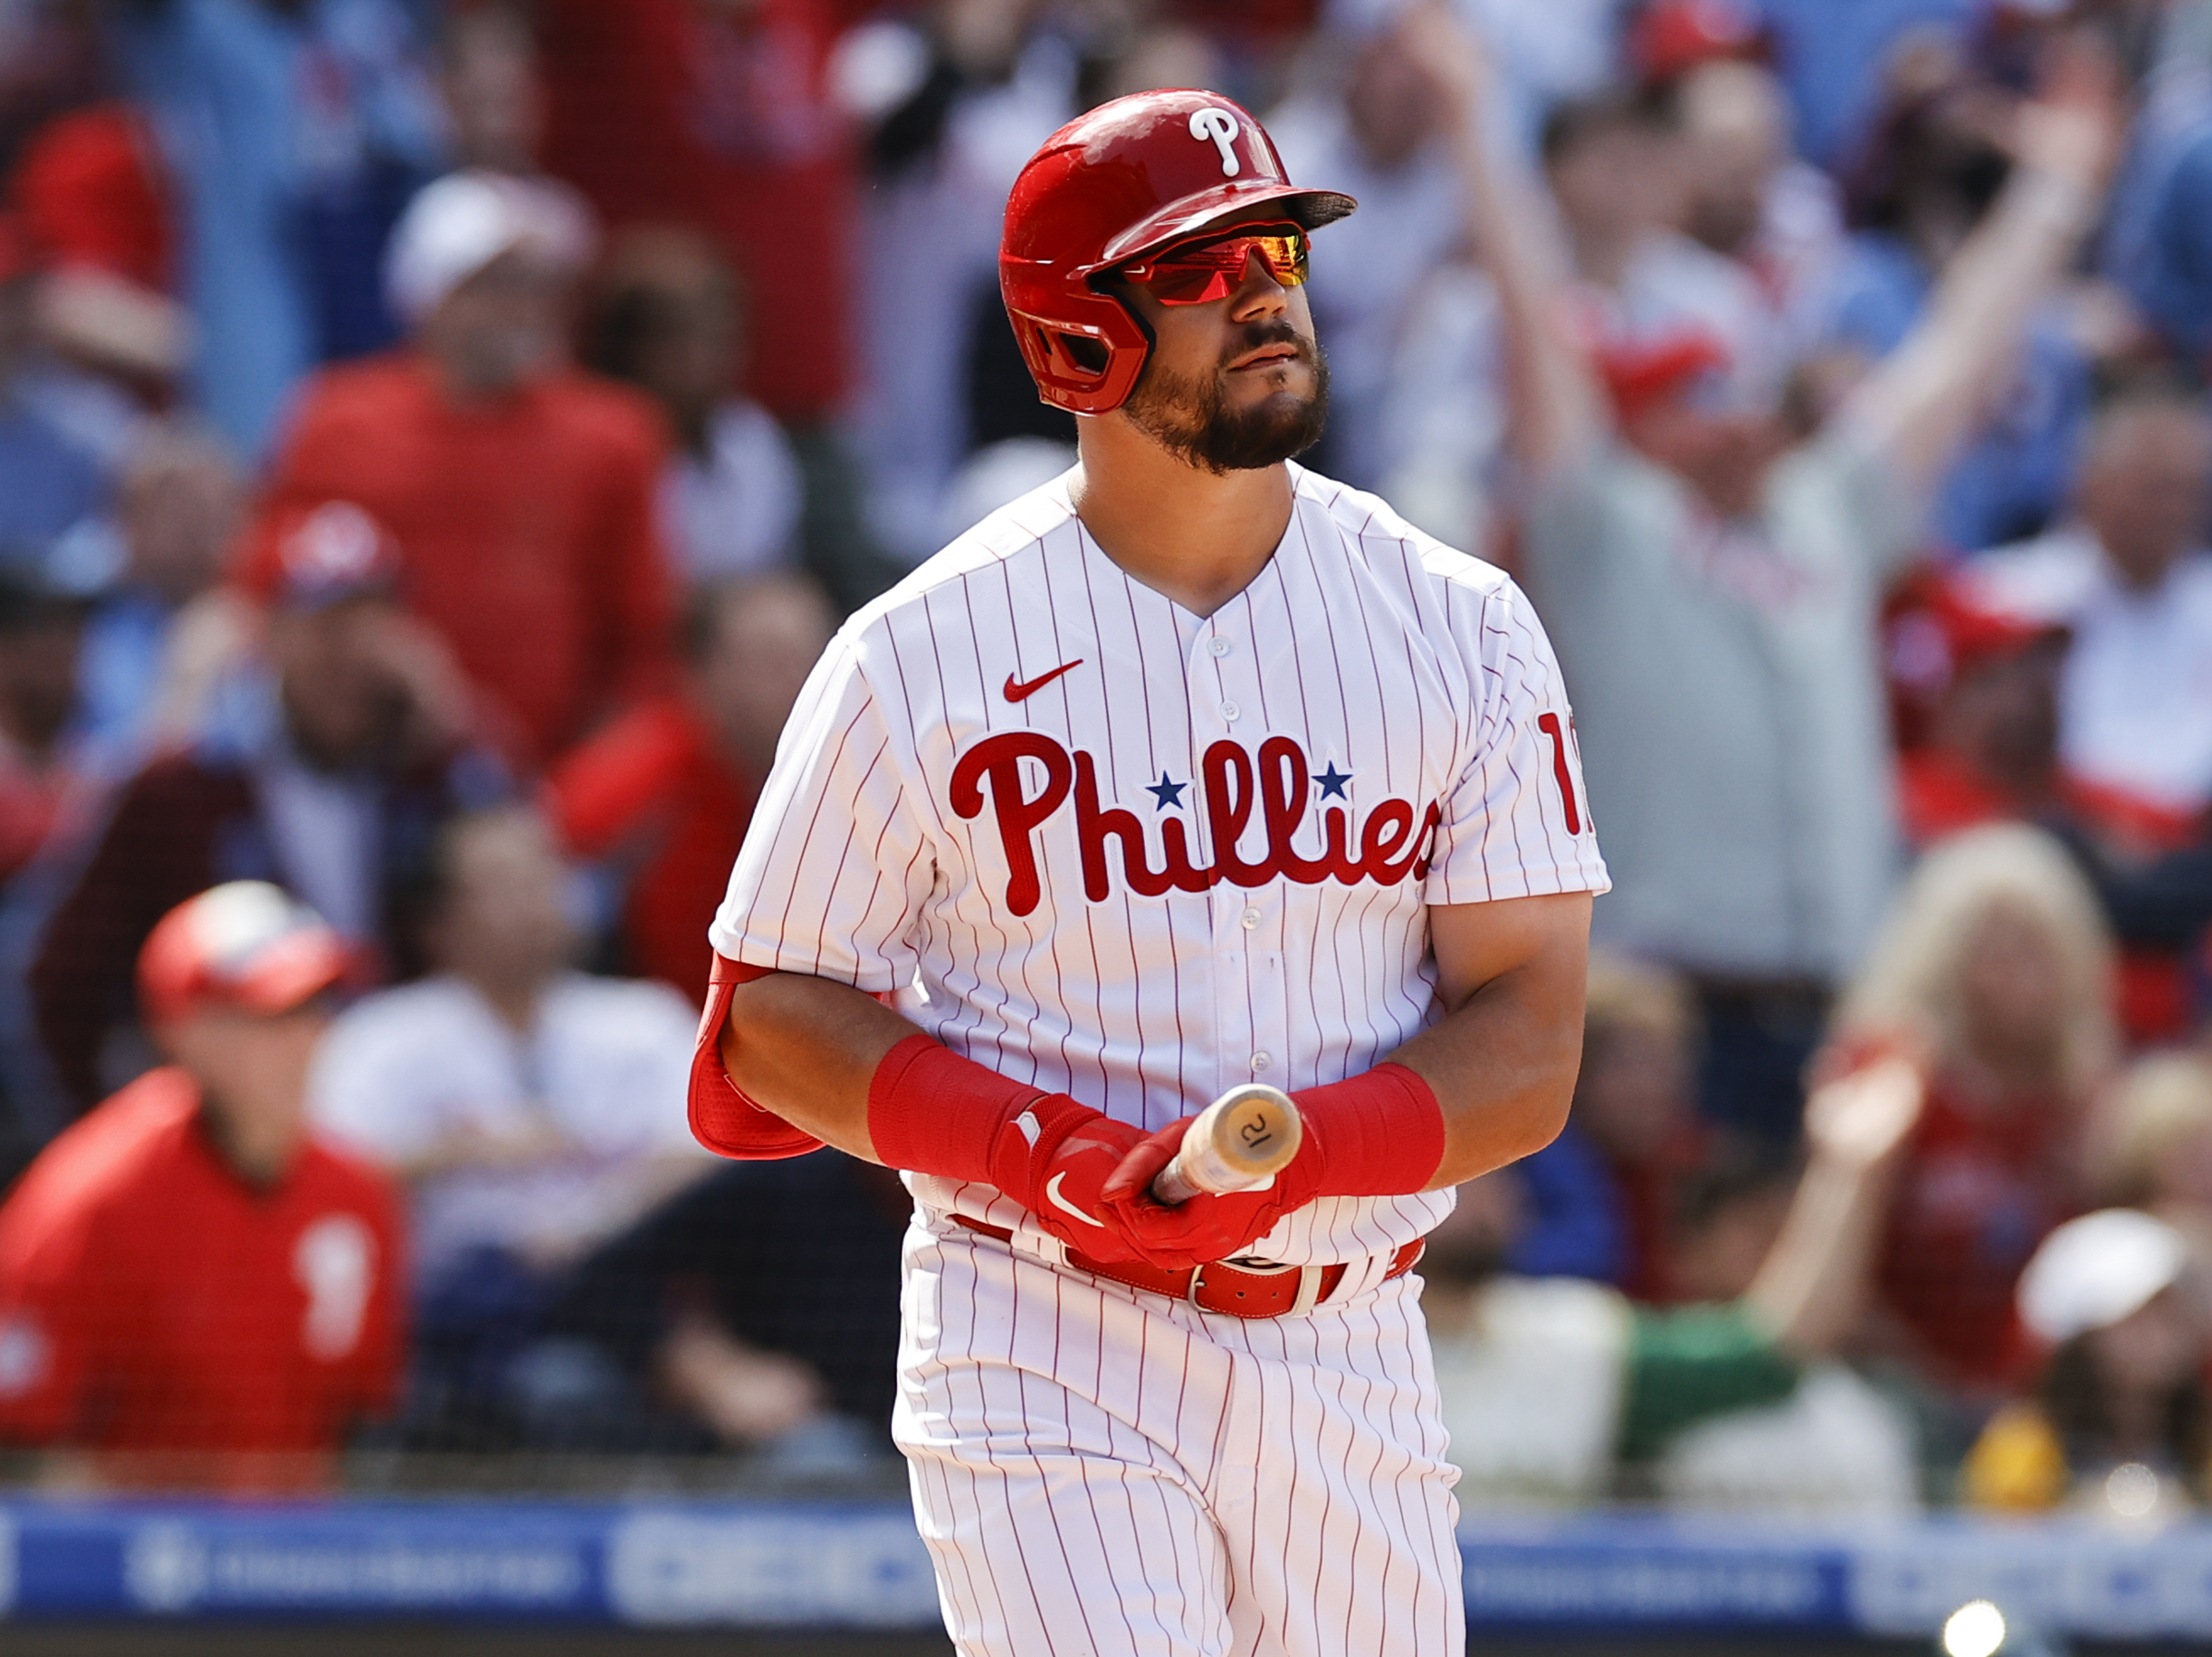 Kyle Schwarber's majestic homer lifts Phillies over Padres